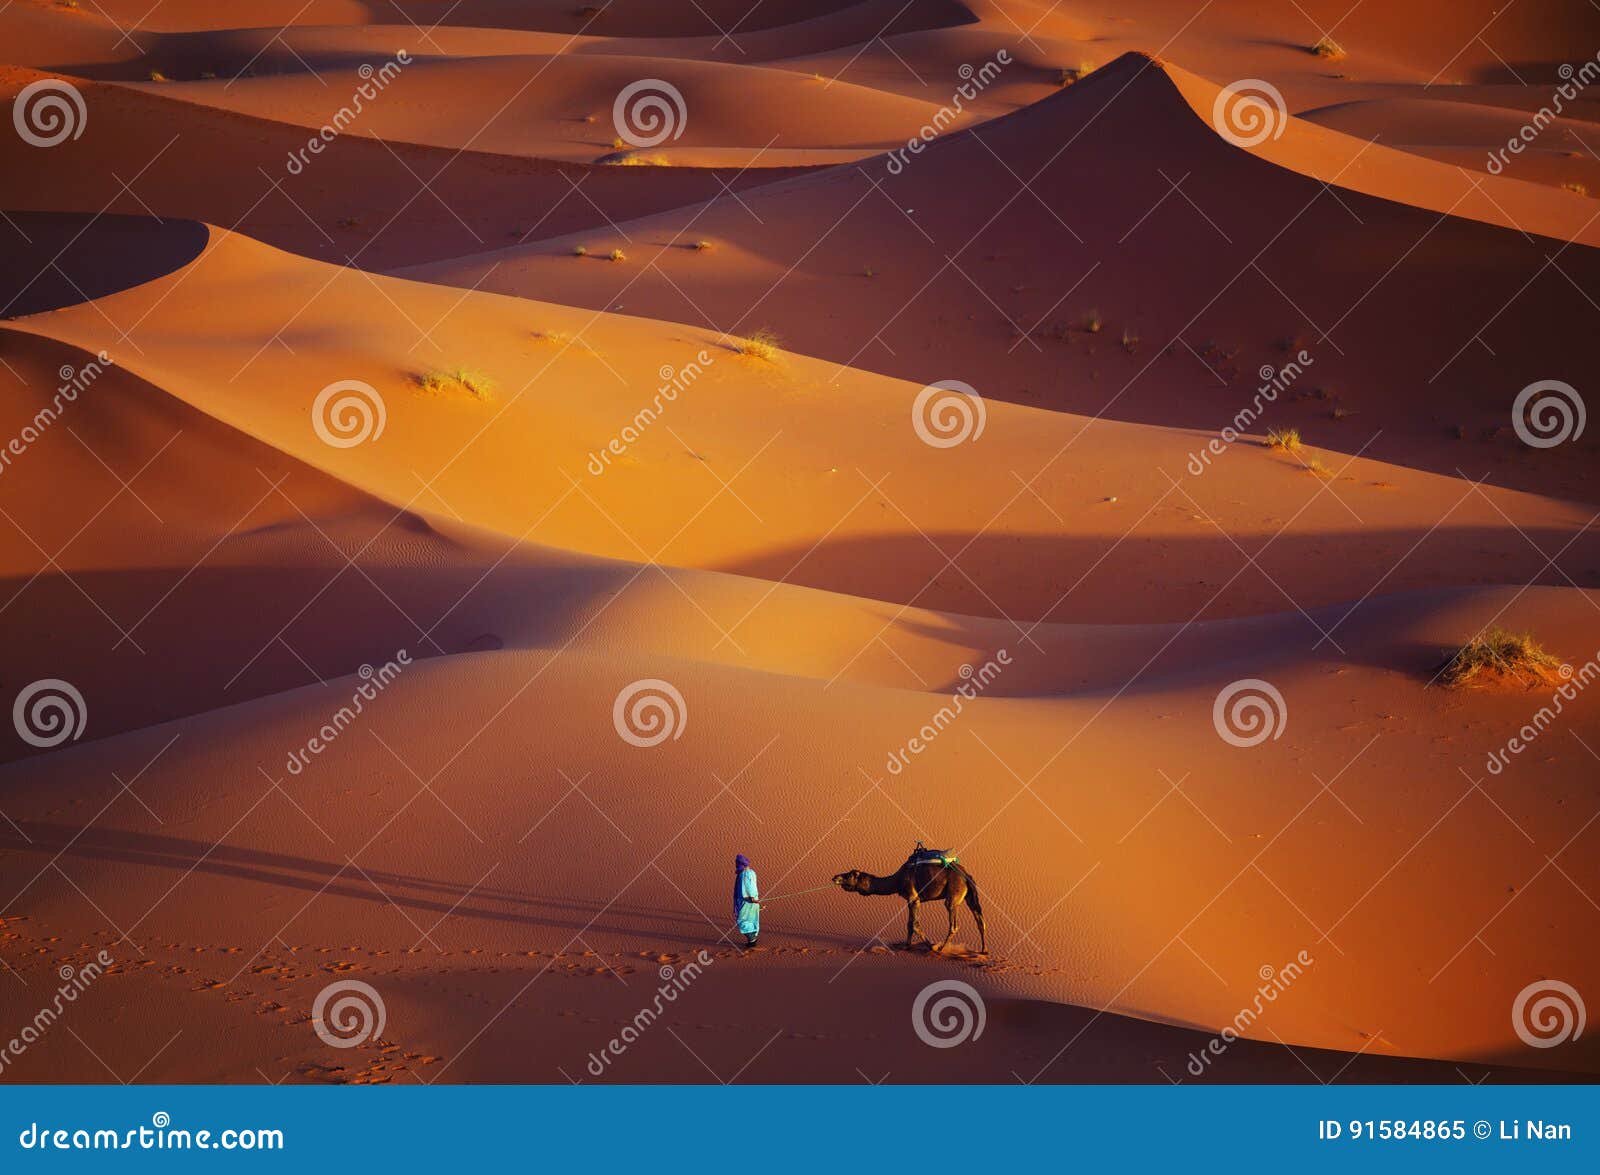 lonely man and camel in sahara desert